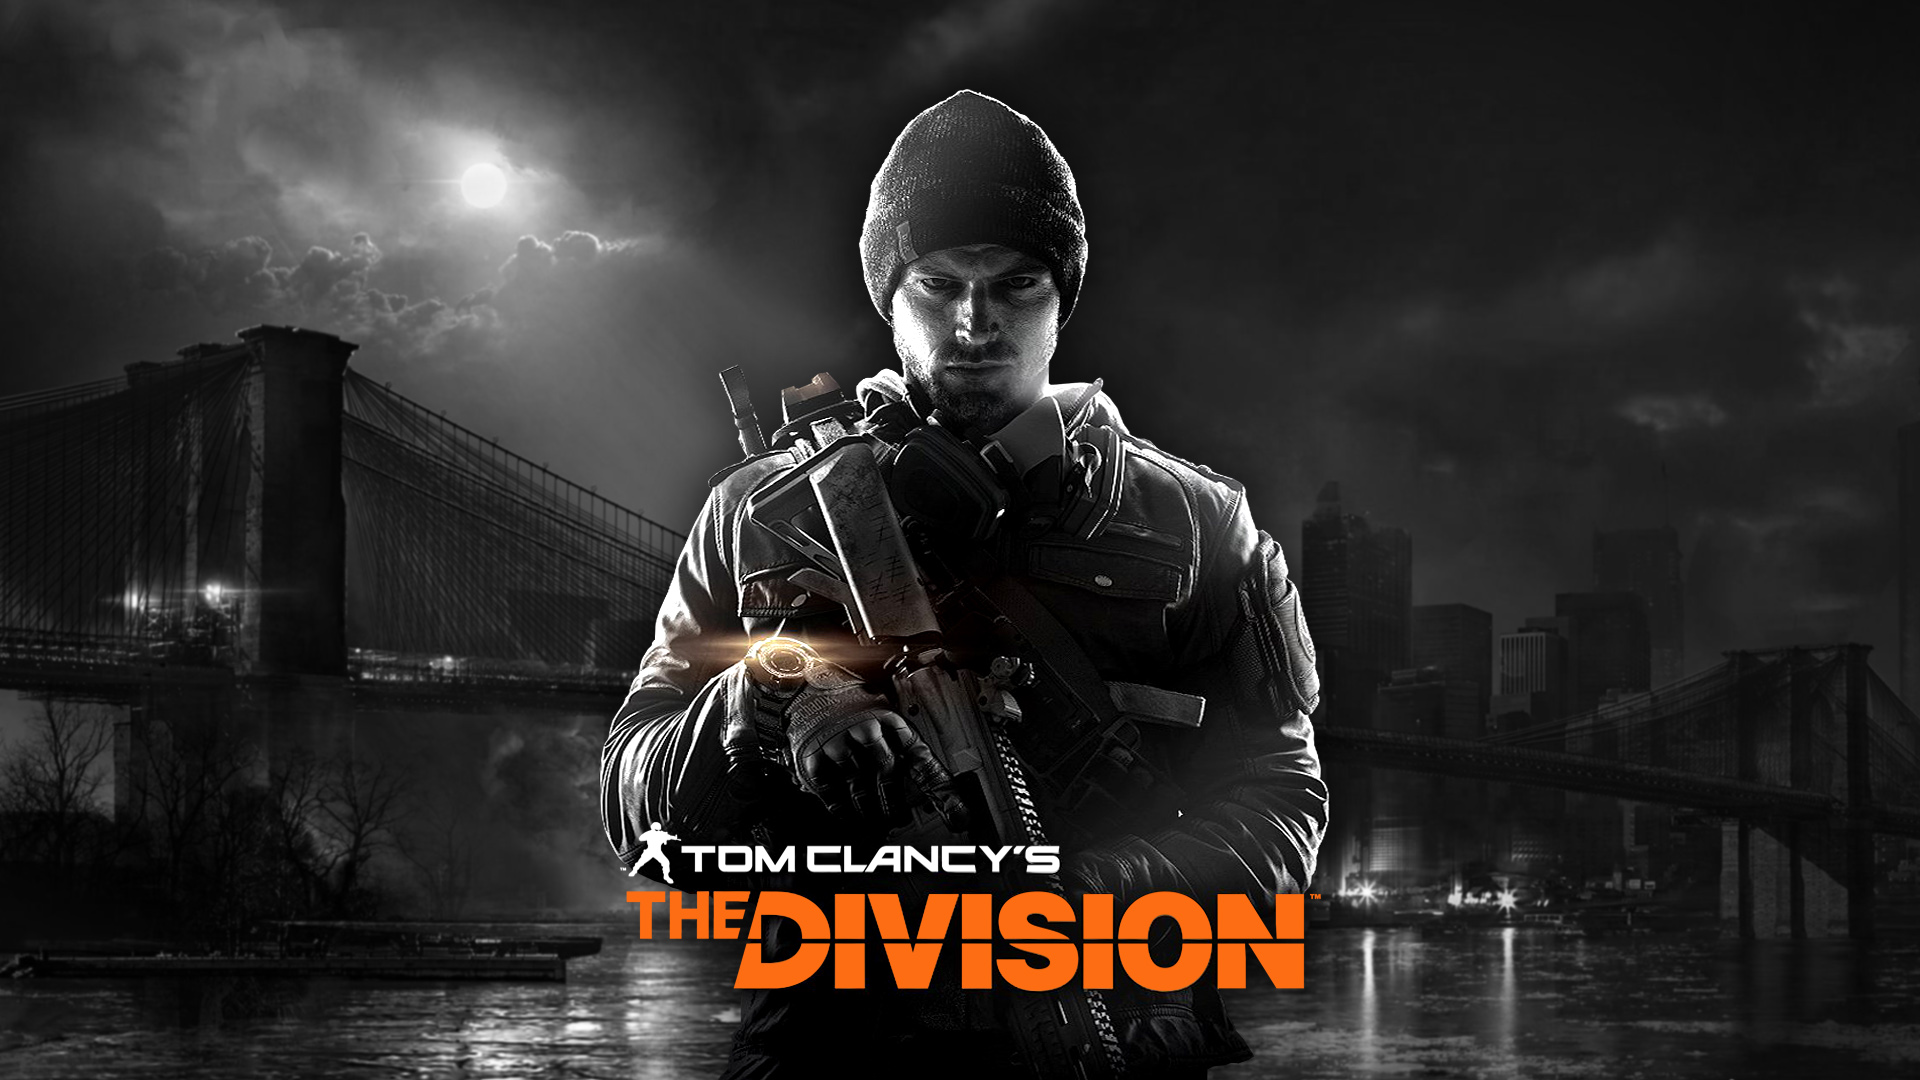 Free Download Tom Clancys The Division Wallpapers Hd Inspirationseekcom 19x1080 For Your Desktop Mobile Tablet Explore 49 The Division Phone Wallpaper The Division Wallpaper 2560x1440 The Division 4k Wallpaper